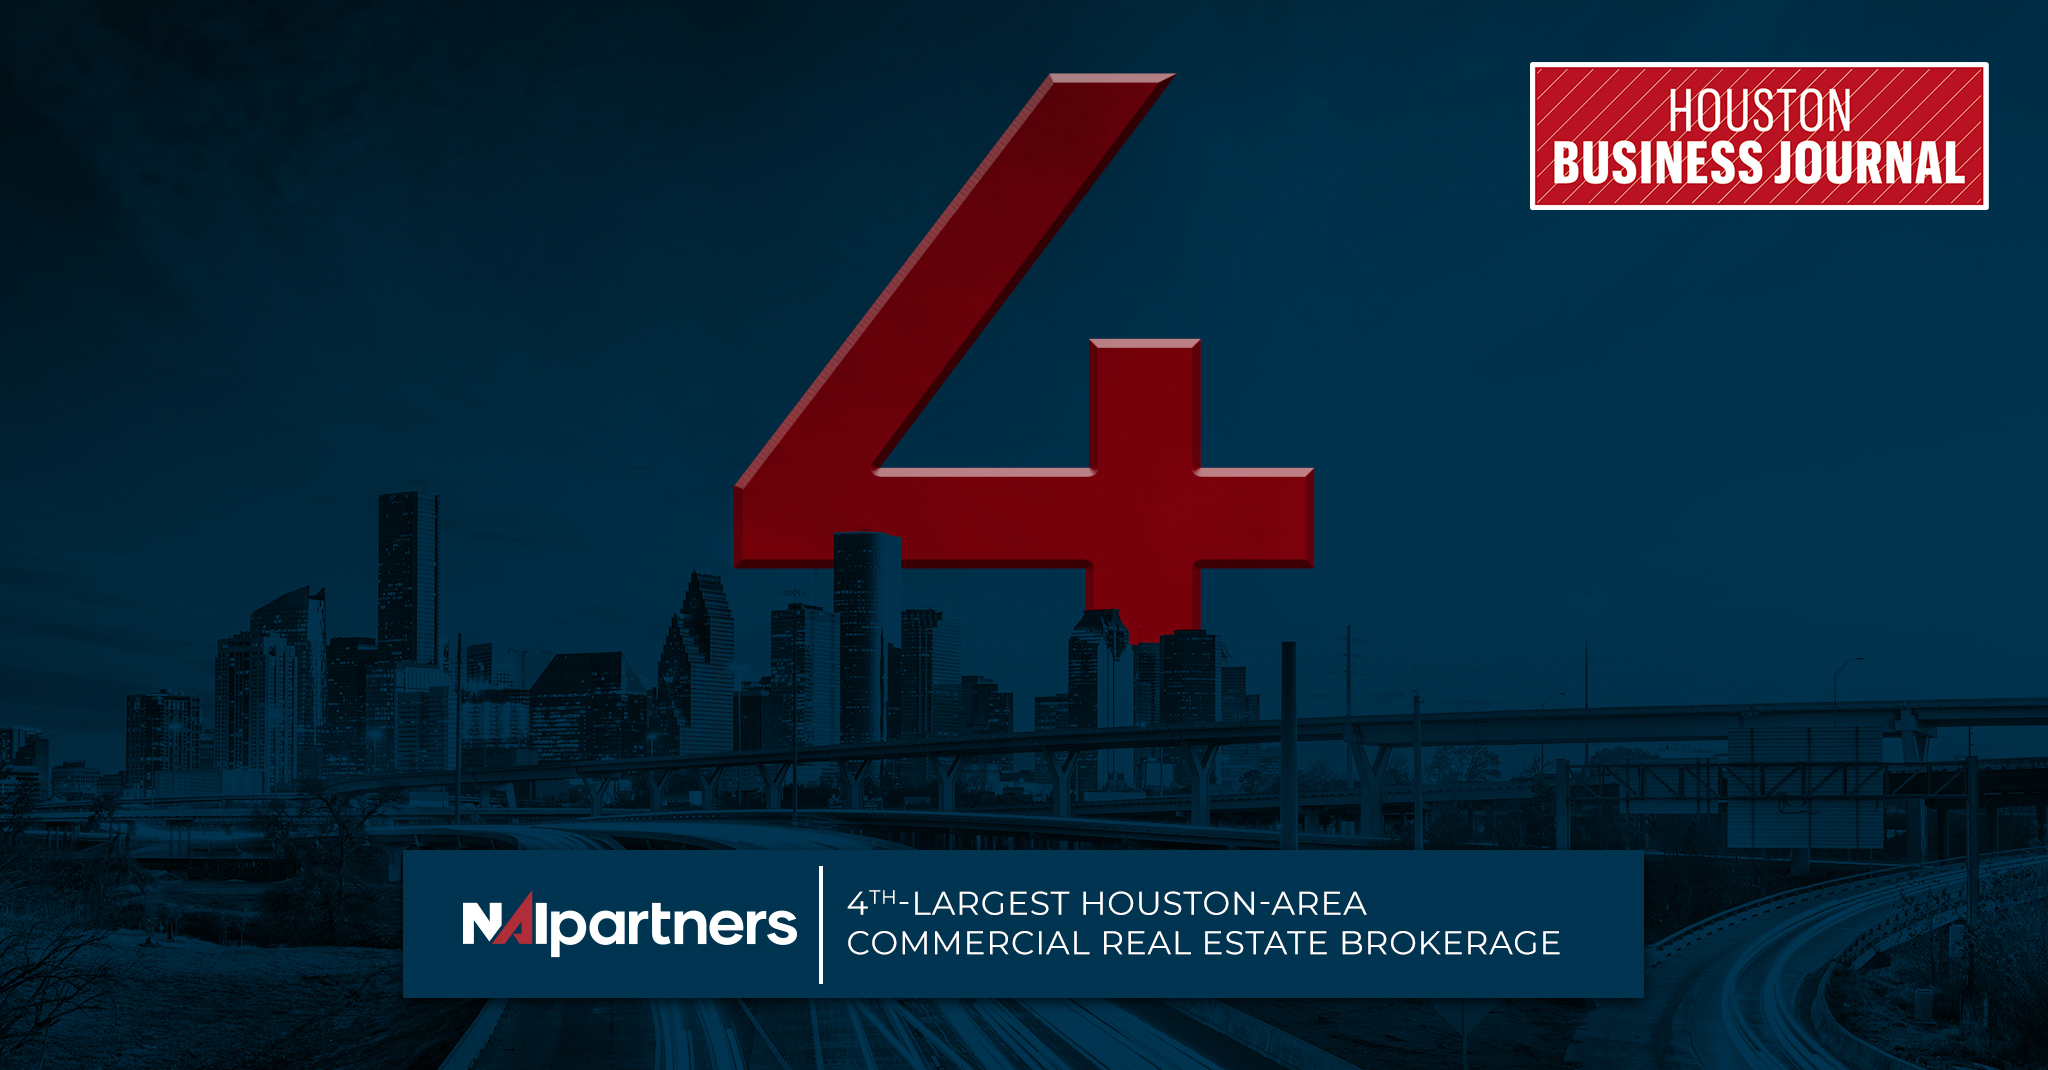 NAI Partners remains 4th-Largest Houston-Area Commercial Real Estate Brokerage Partners Real Estate